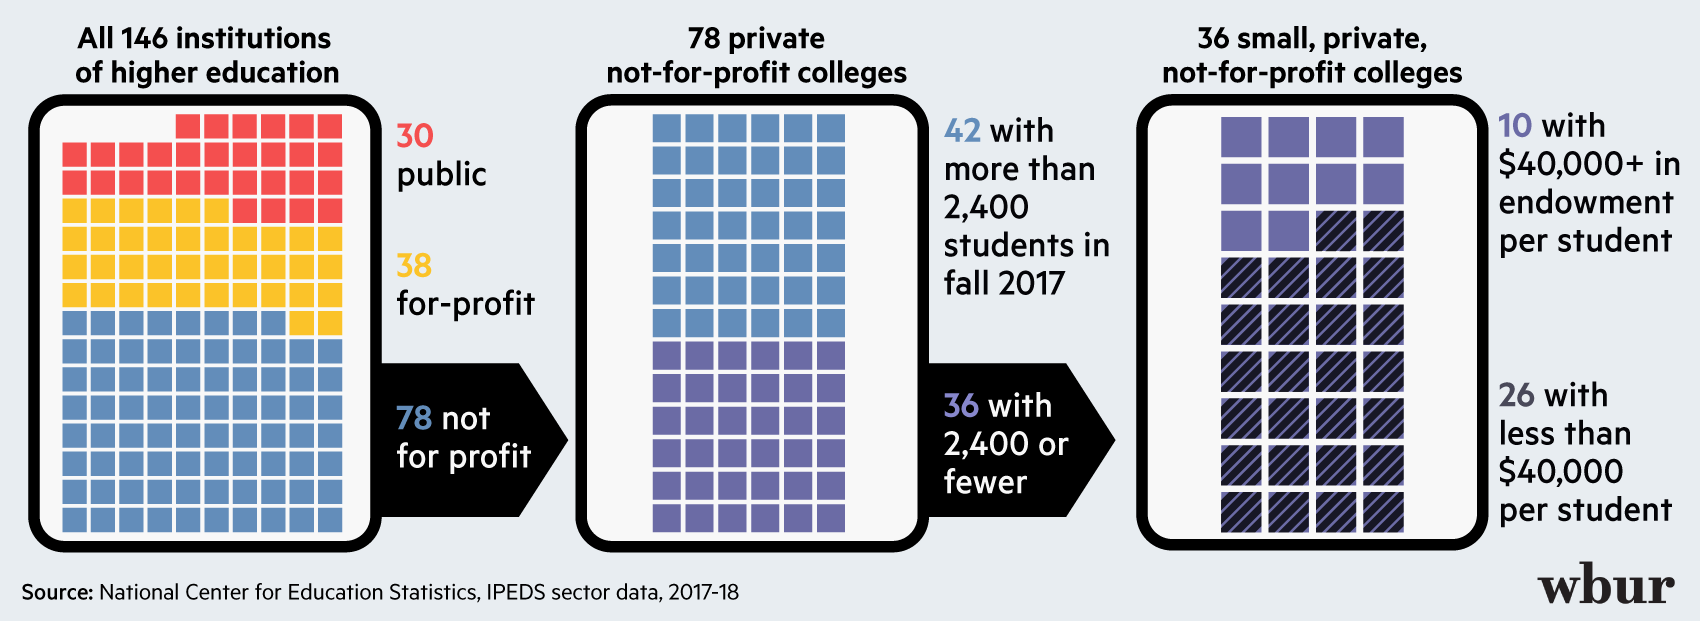 A chart showing how small private colleges, with relatively small endowments, make up almost 1 in 5 of Massachusetts' 146 institutions of higher education.